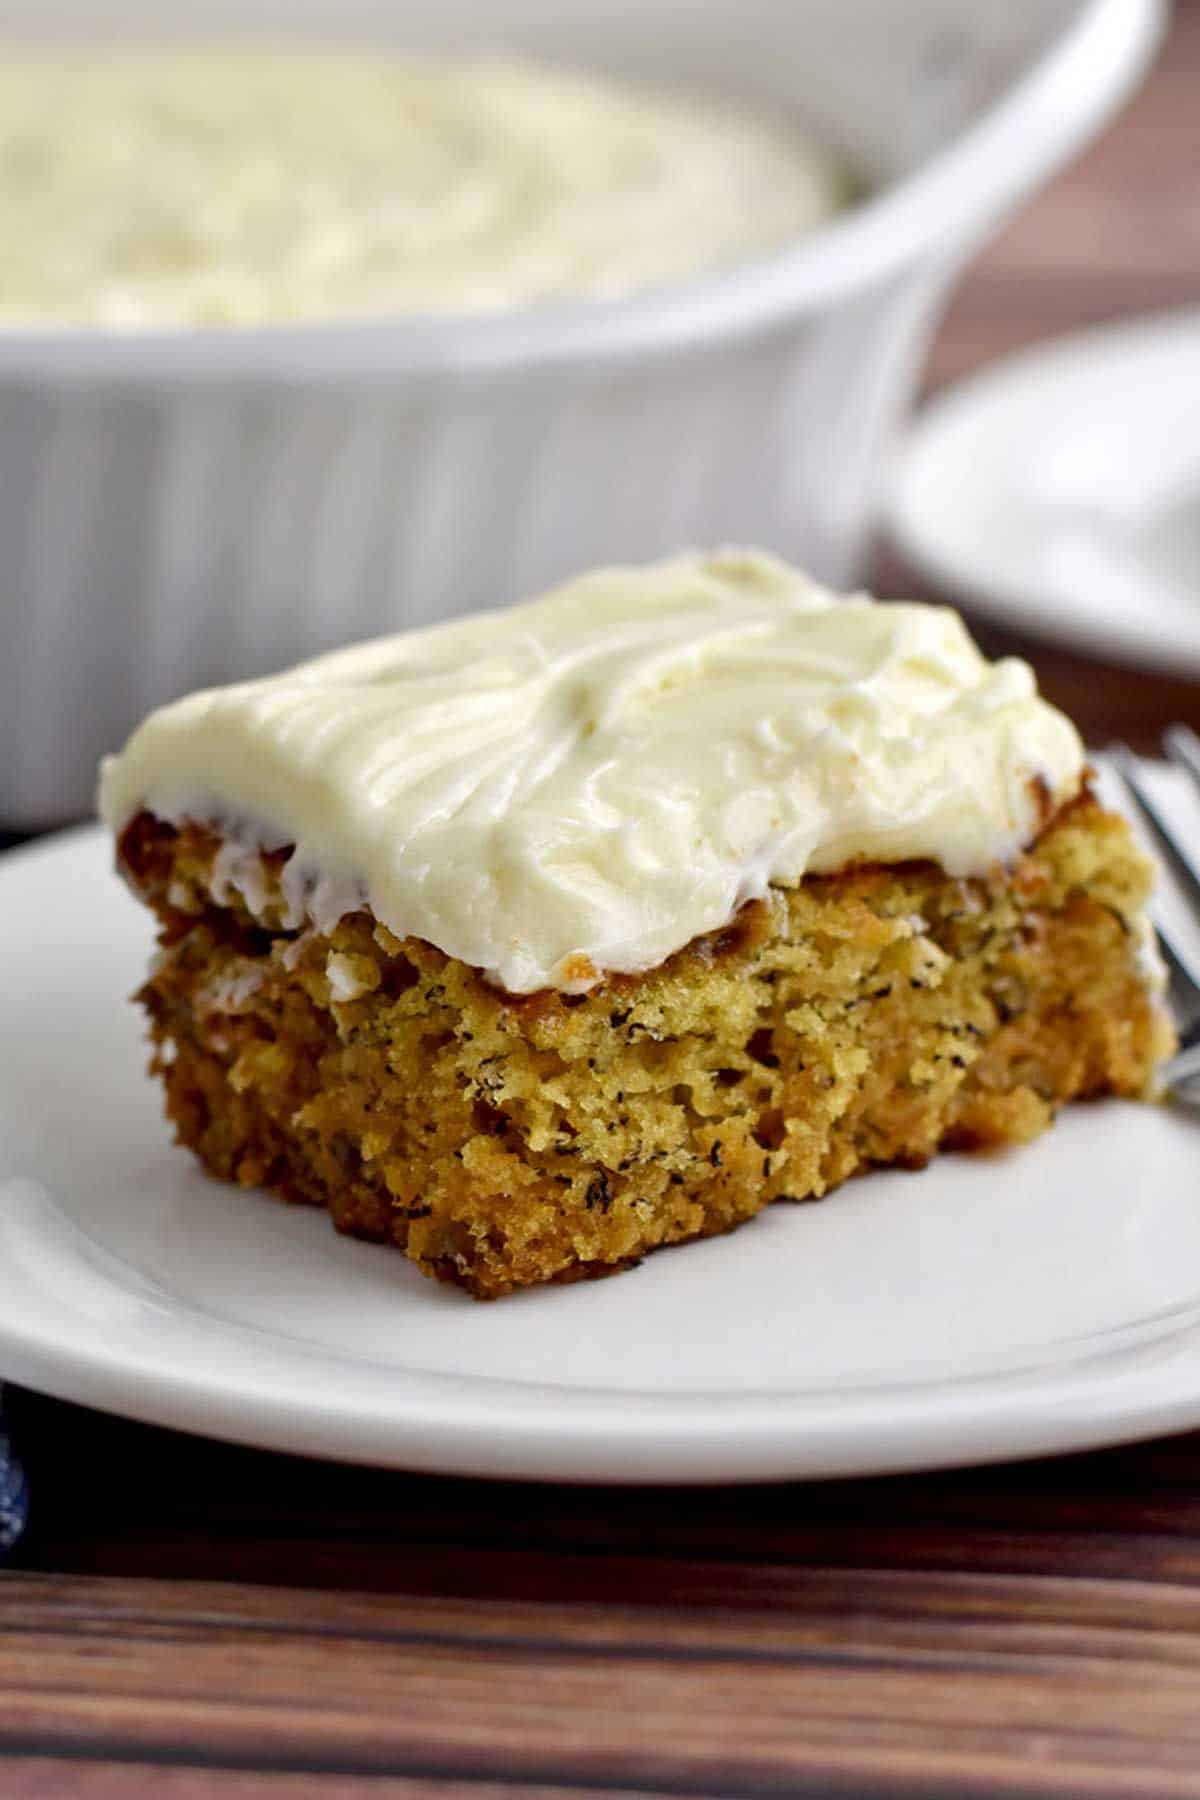 A piece of Gluten-Free Banana Cake With Cream Cheese Frosting on a white plate.